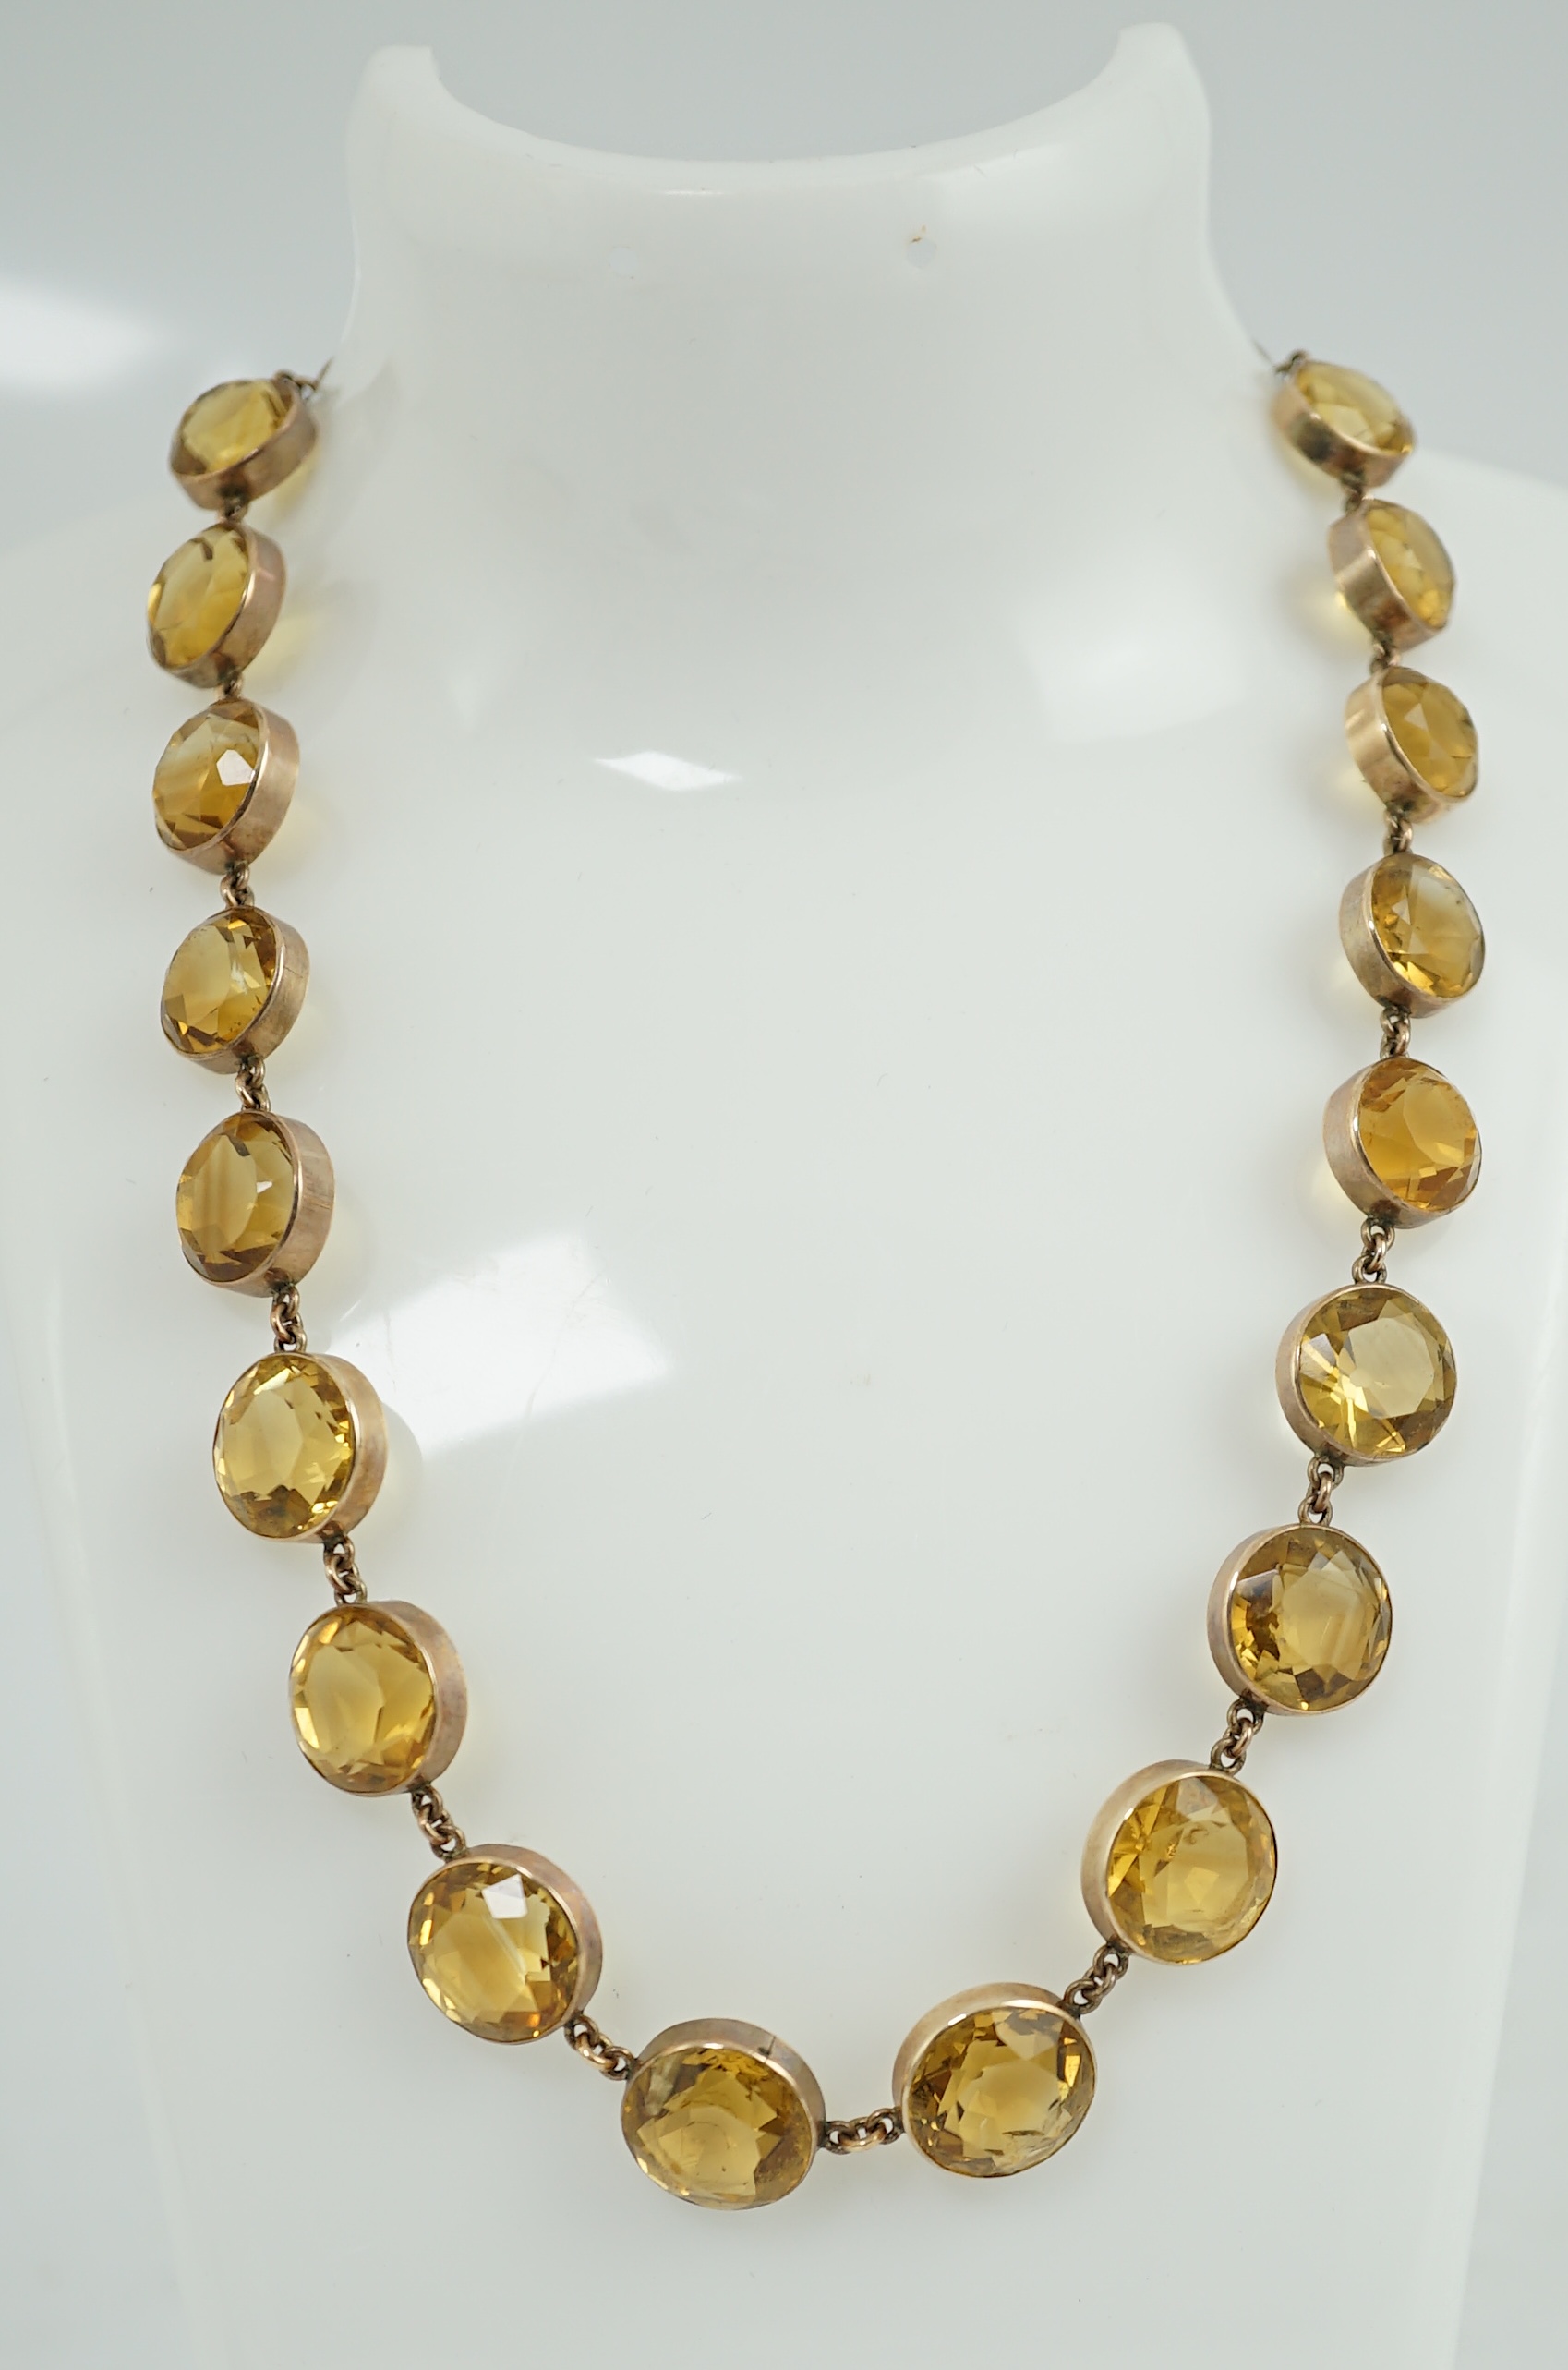 An early 19th century gold and citrine riviere necklace